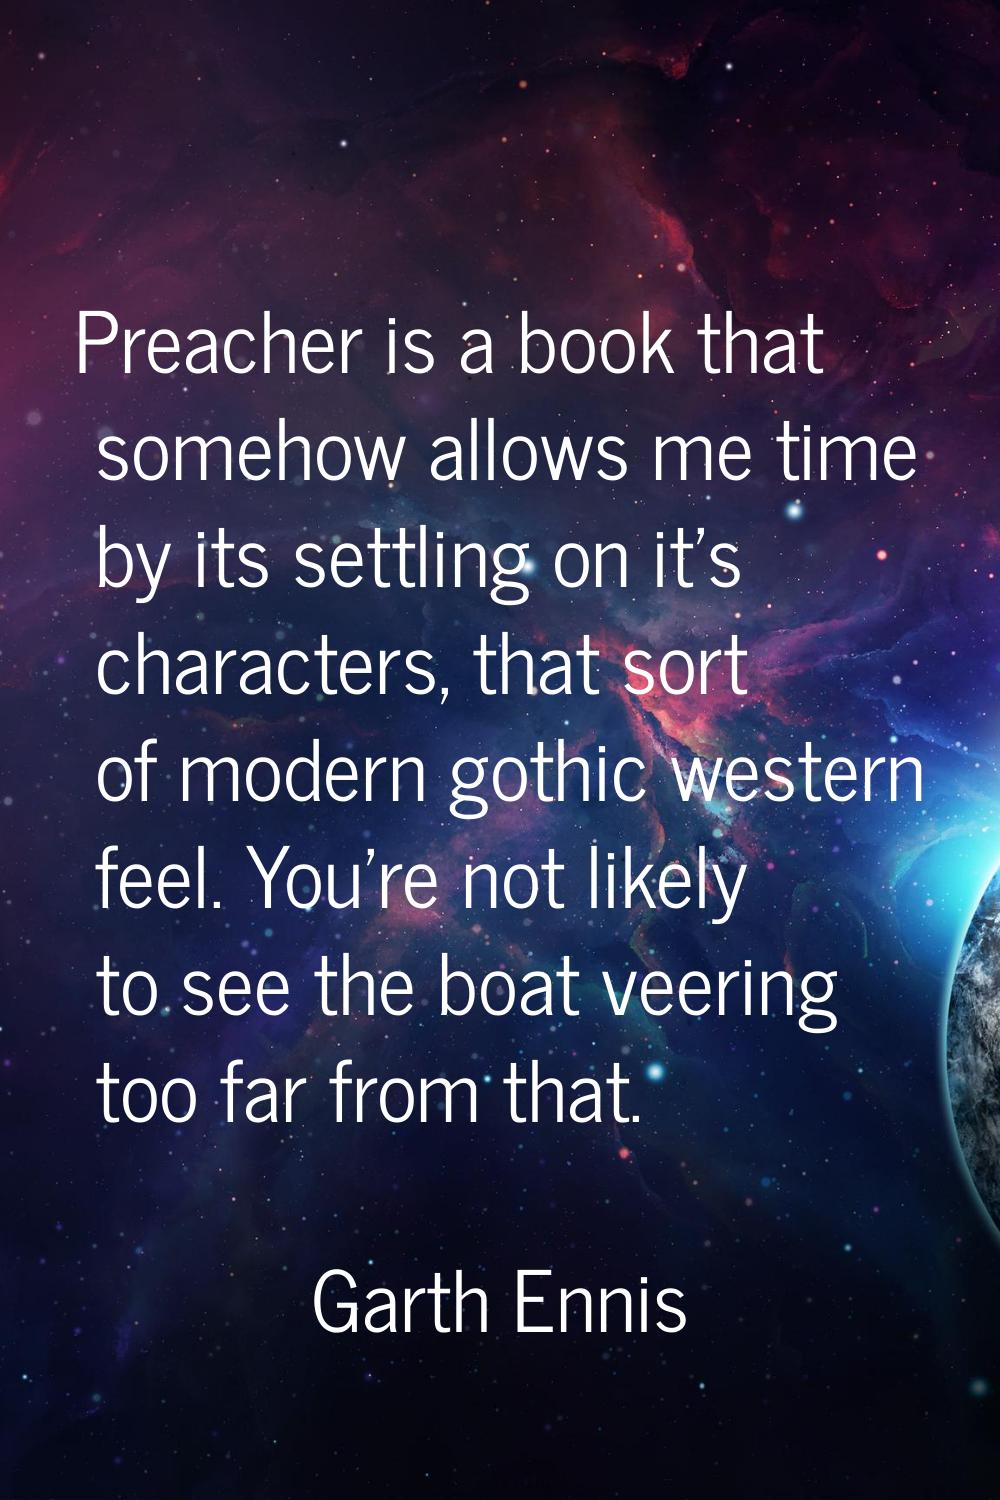 Preacher is a book that somehow allows me time by its settling on it's characters, that sort of mod